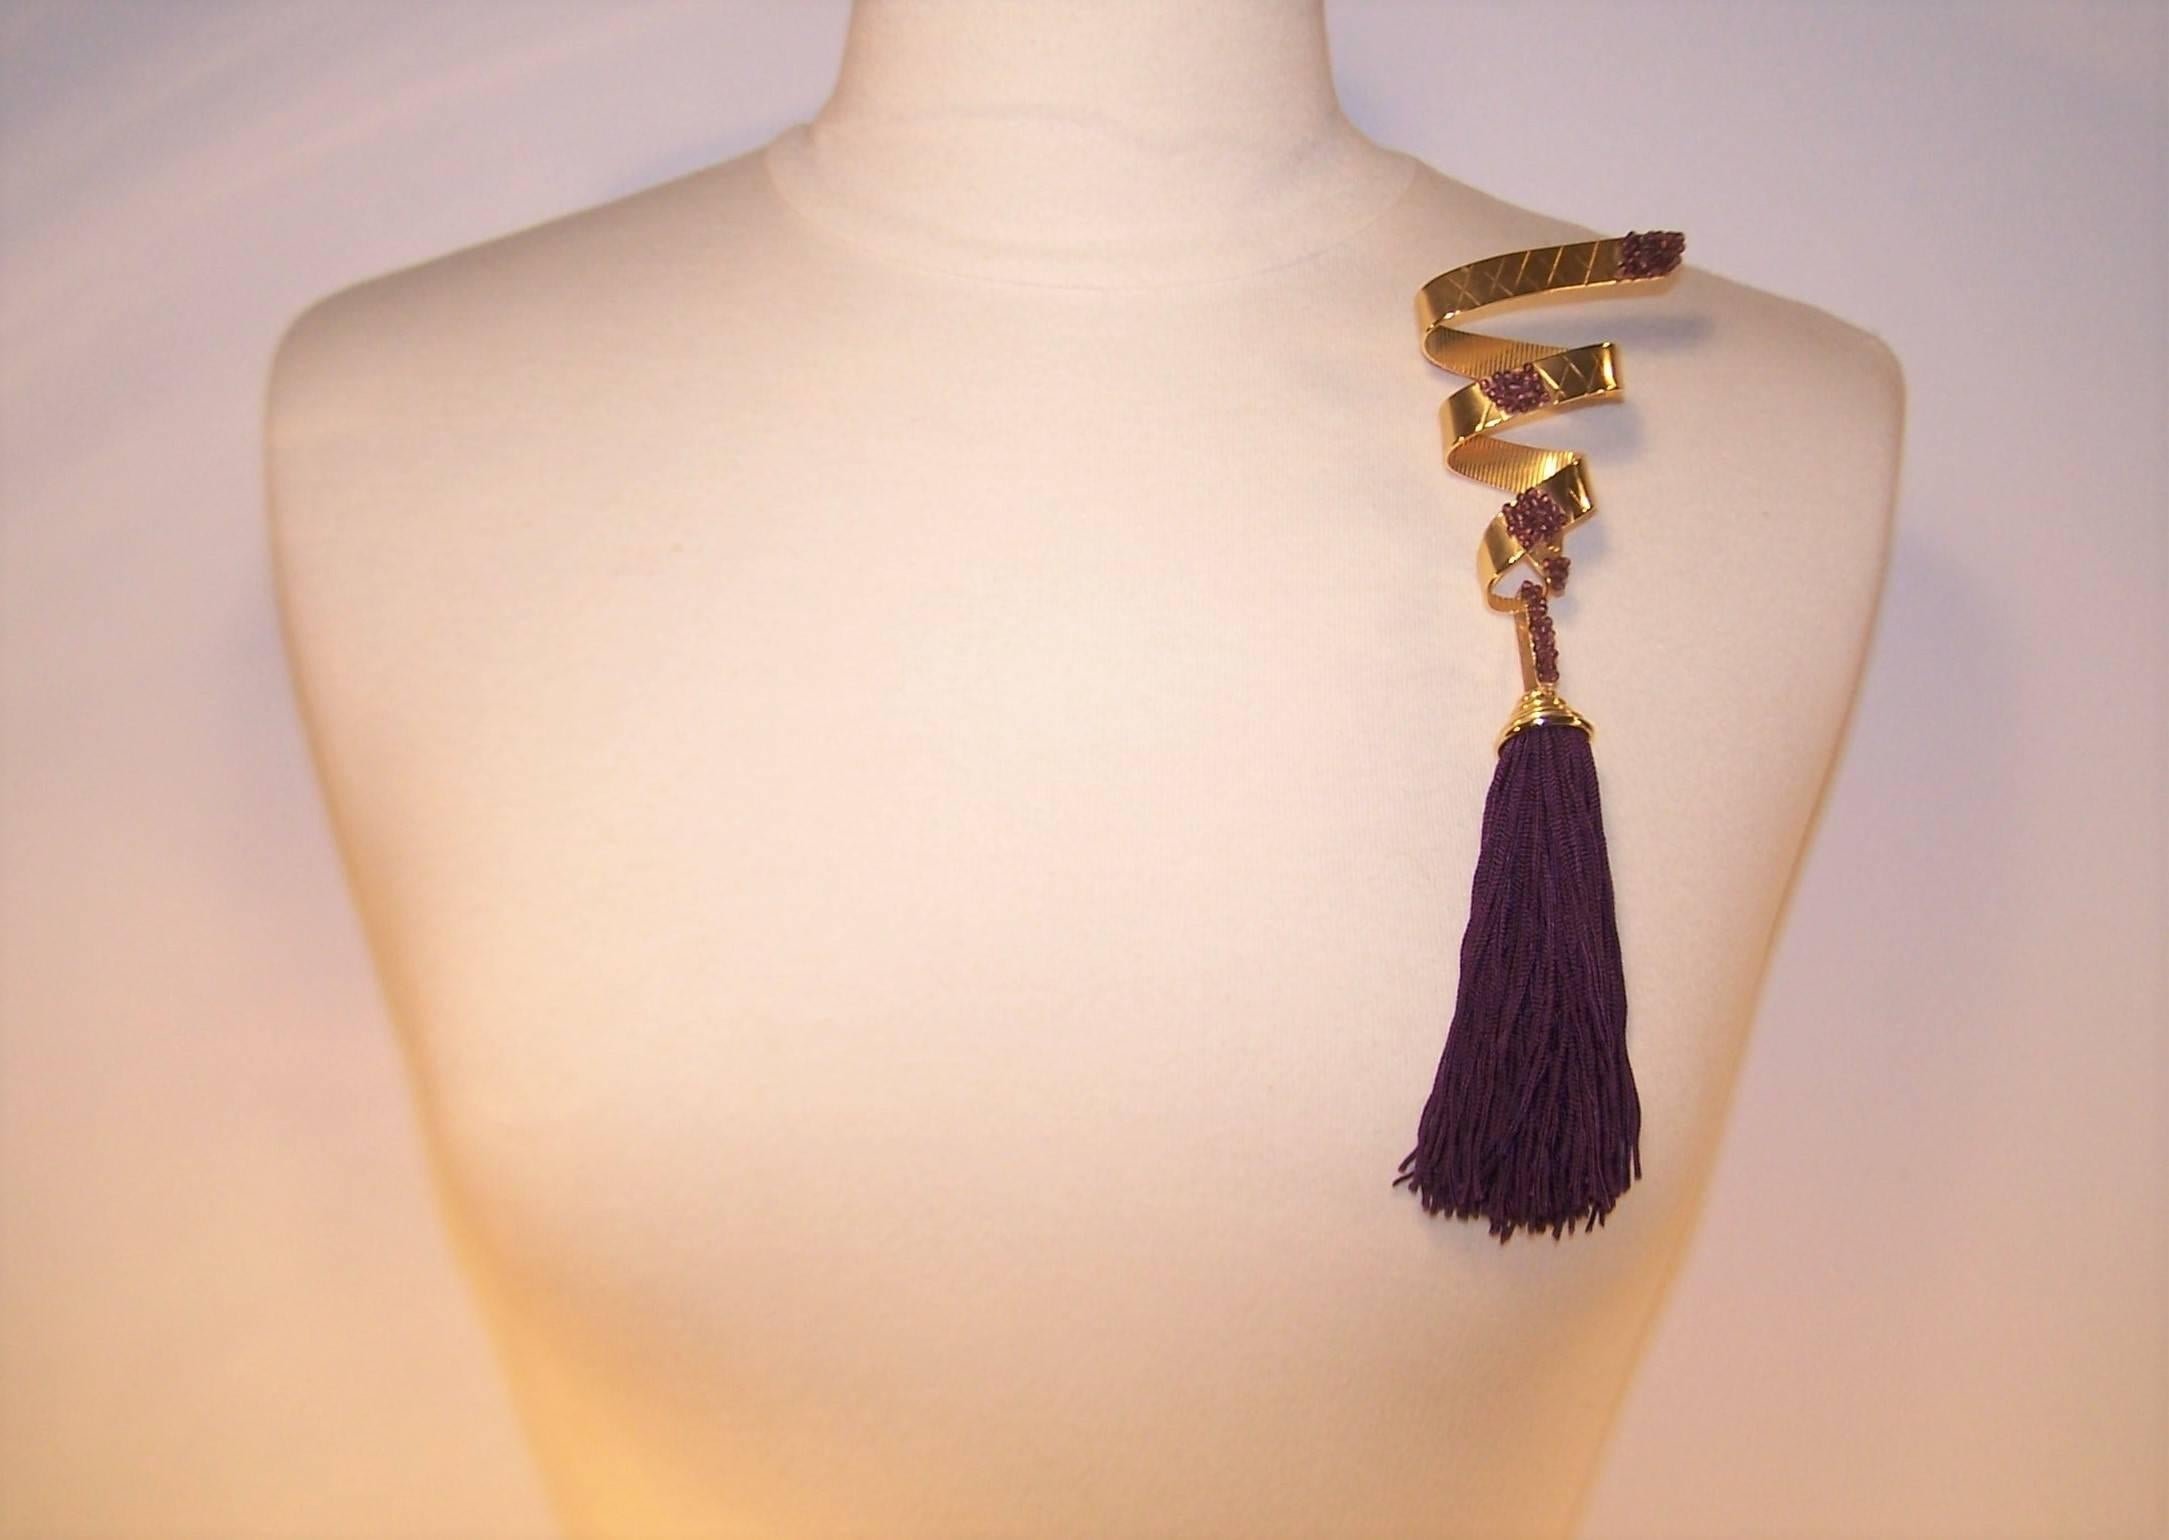 A large statement brooch can be the perfect accessory for an outfit.  This fun Italian piece by Spazio features gold tone metal detailed with cross hatching and embellished with purple beading and an articulated silk tassel.  It measures a total of